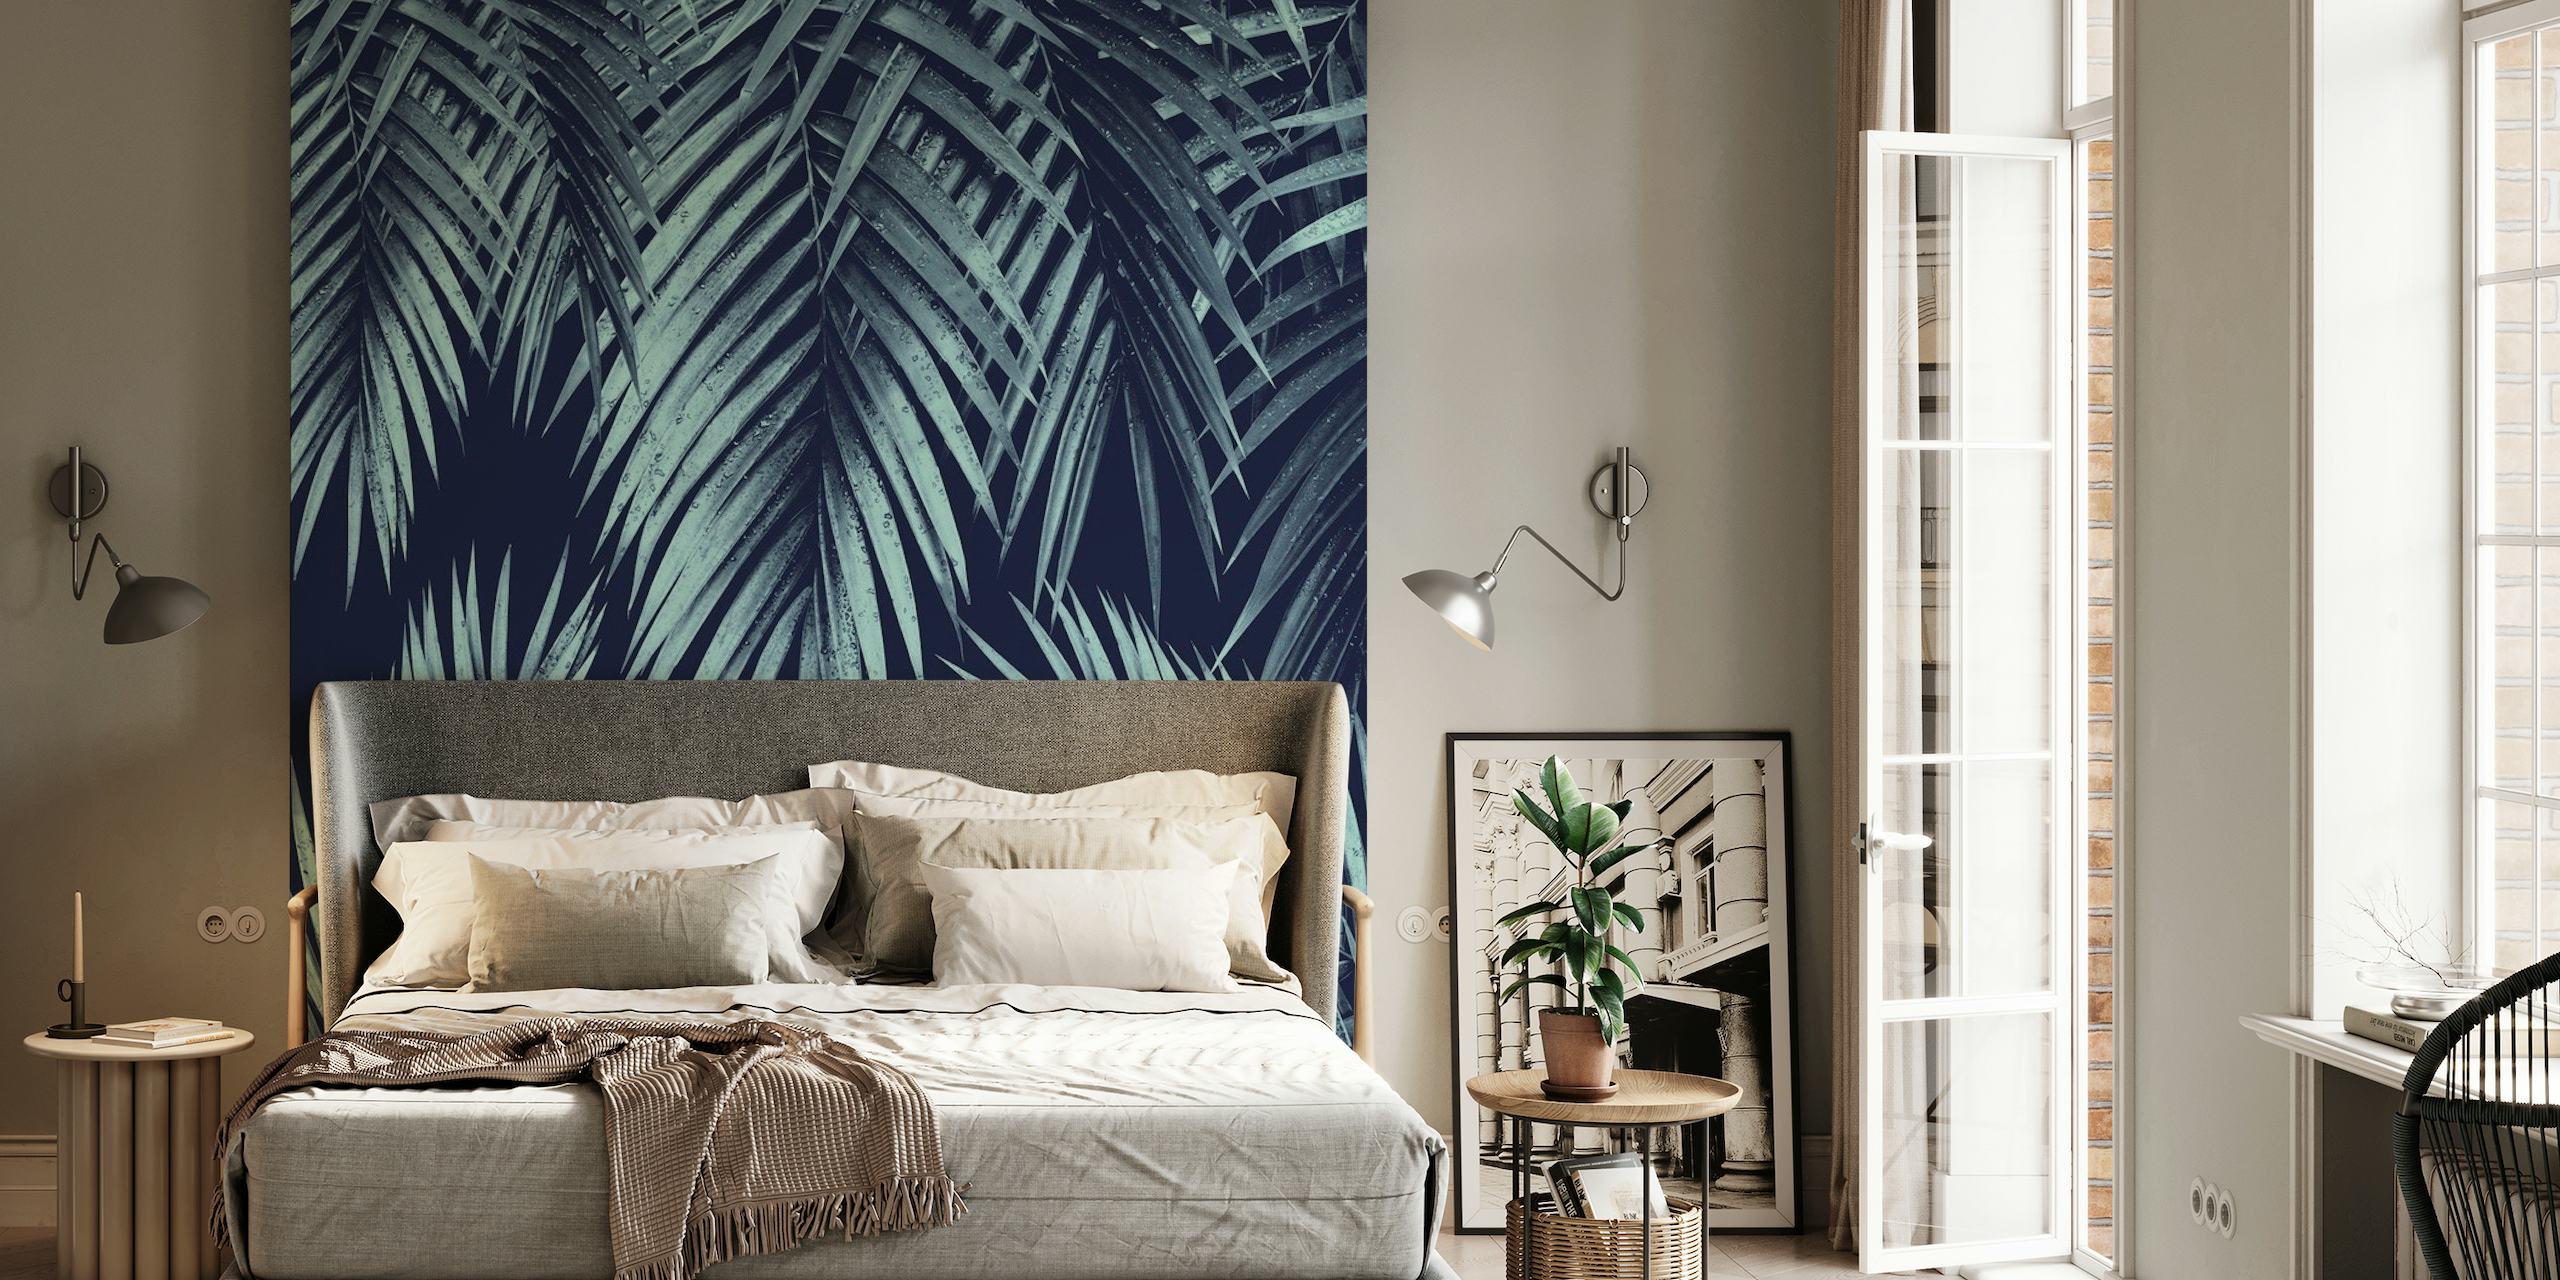 Fotomural Palm Leaf Jungle Night Vibes con fondo oscuro